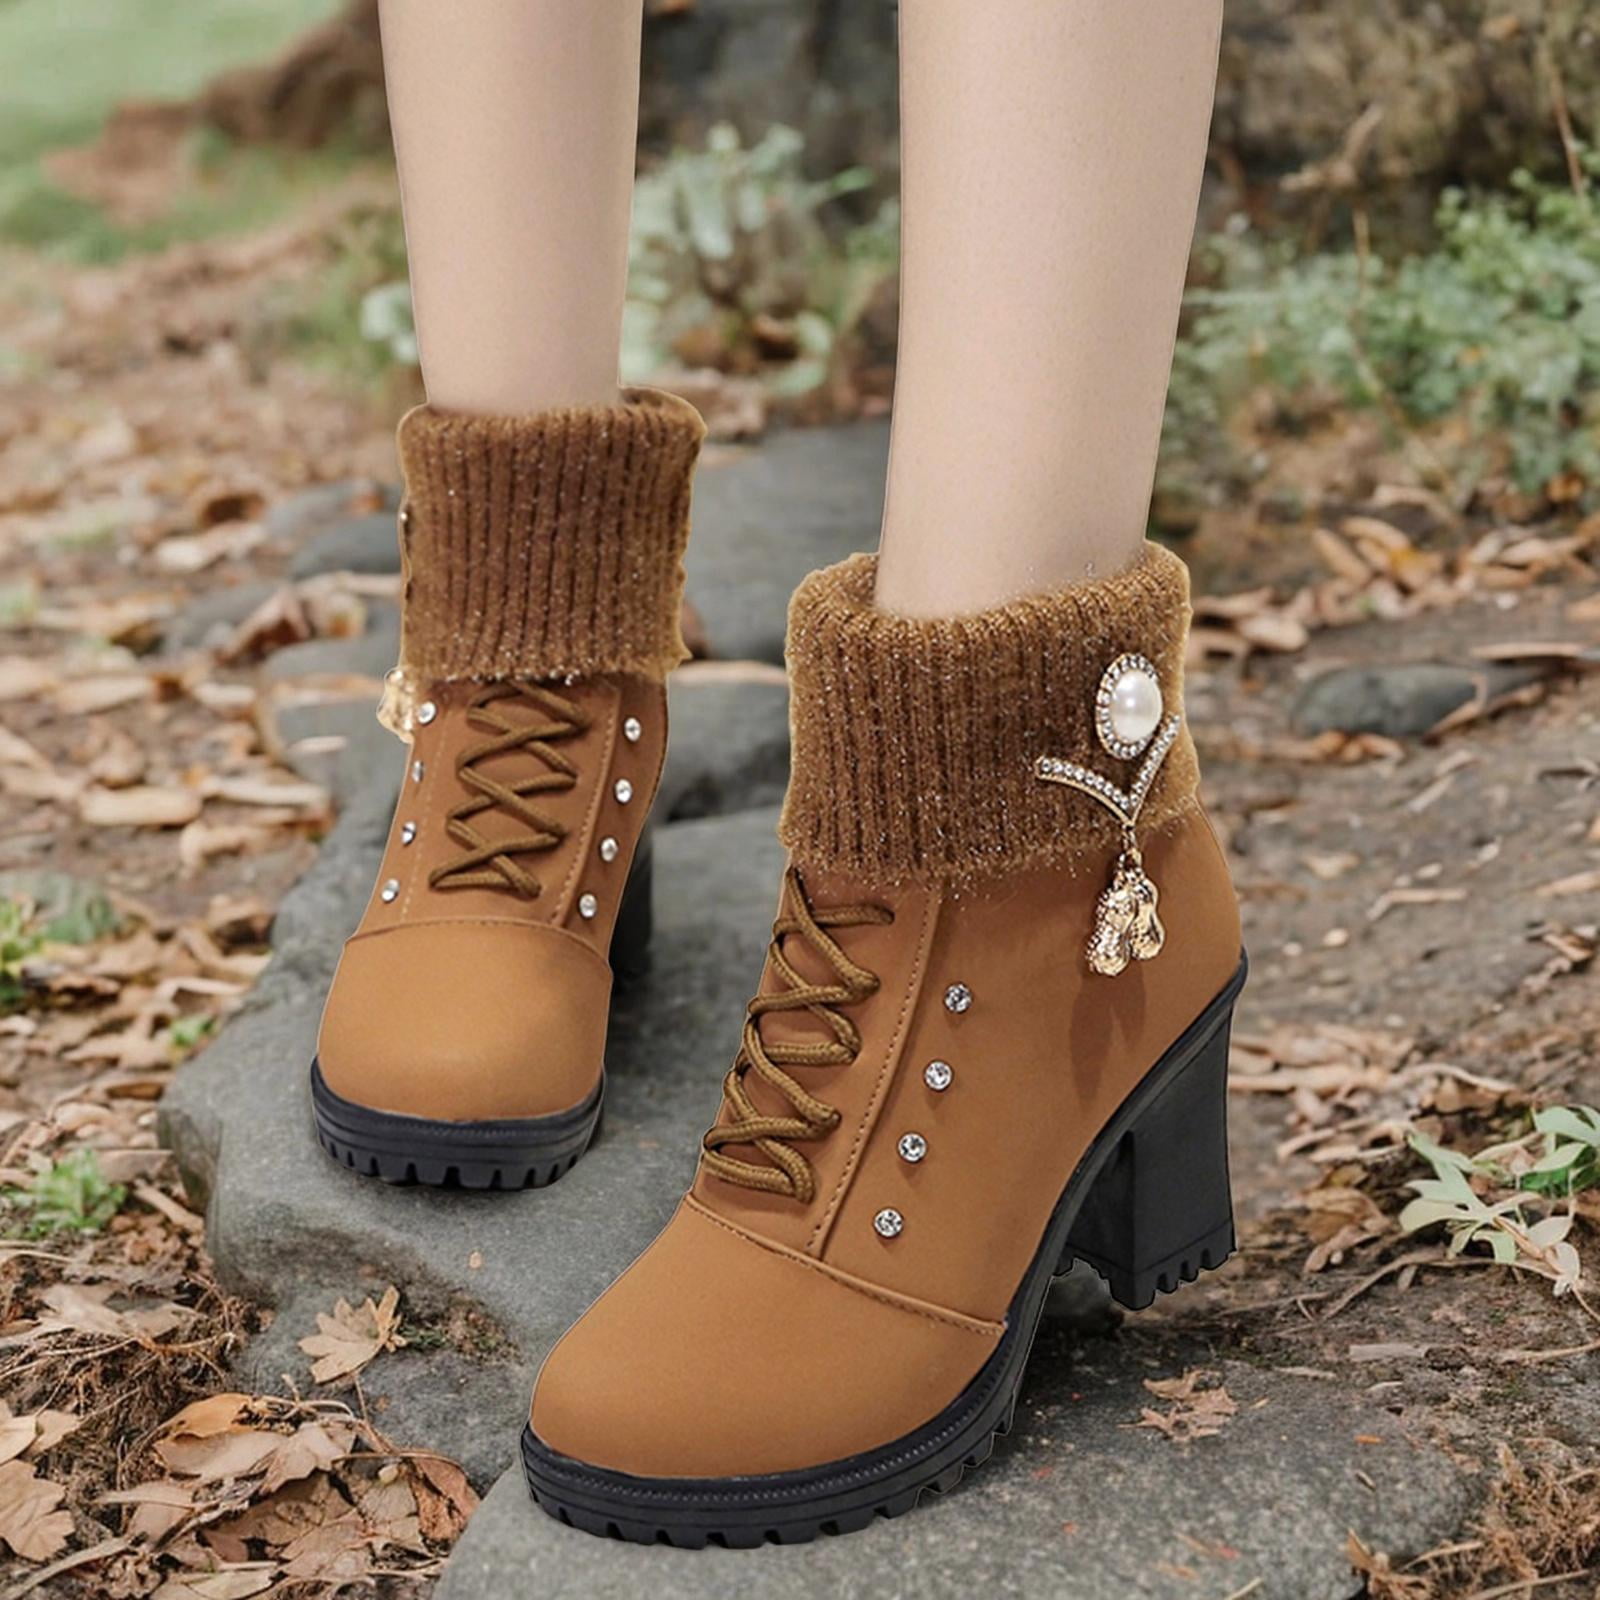 27 Warm Boots That'll Make You Actually Want Winter | High heel boots  ankle, Womens high heel boots, Black high heel boots